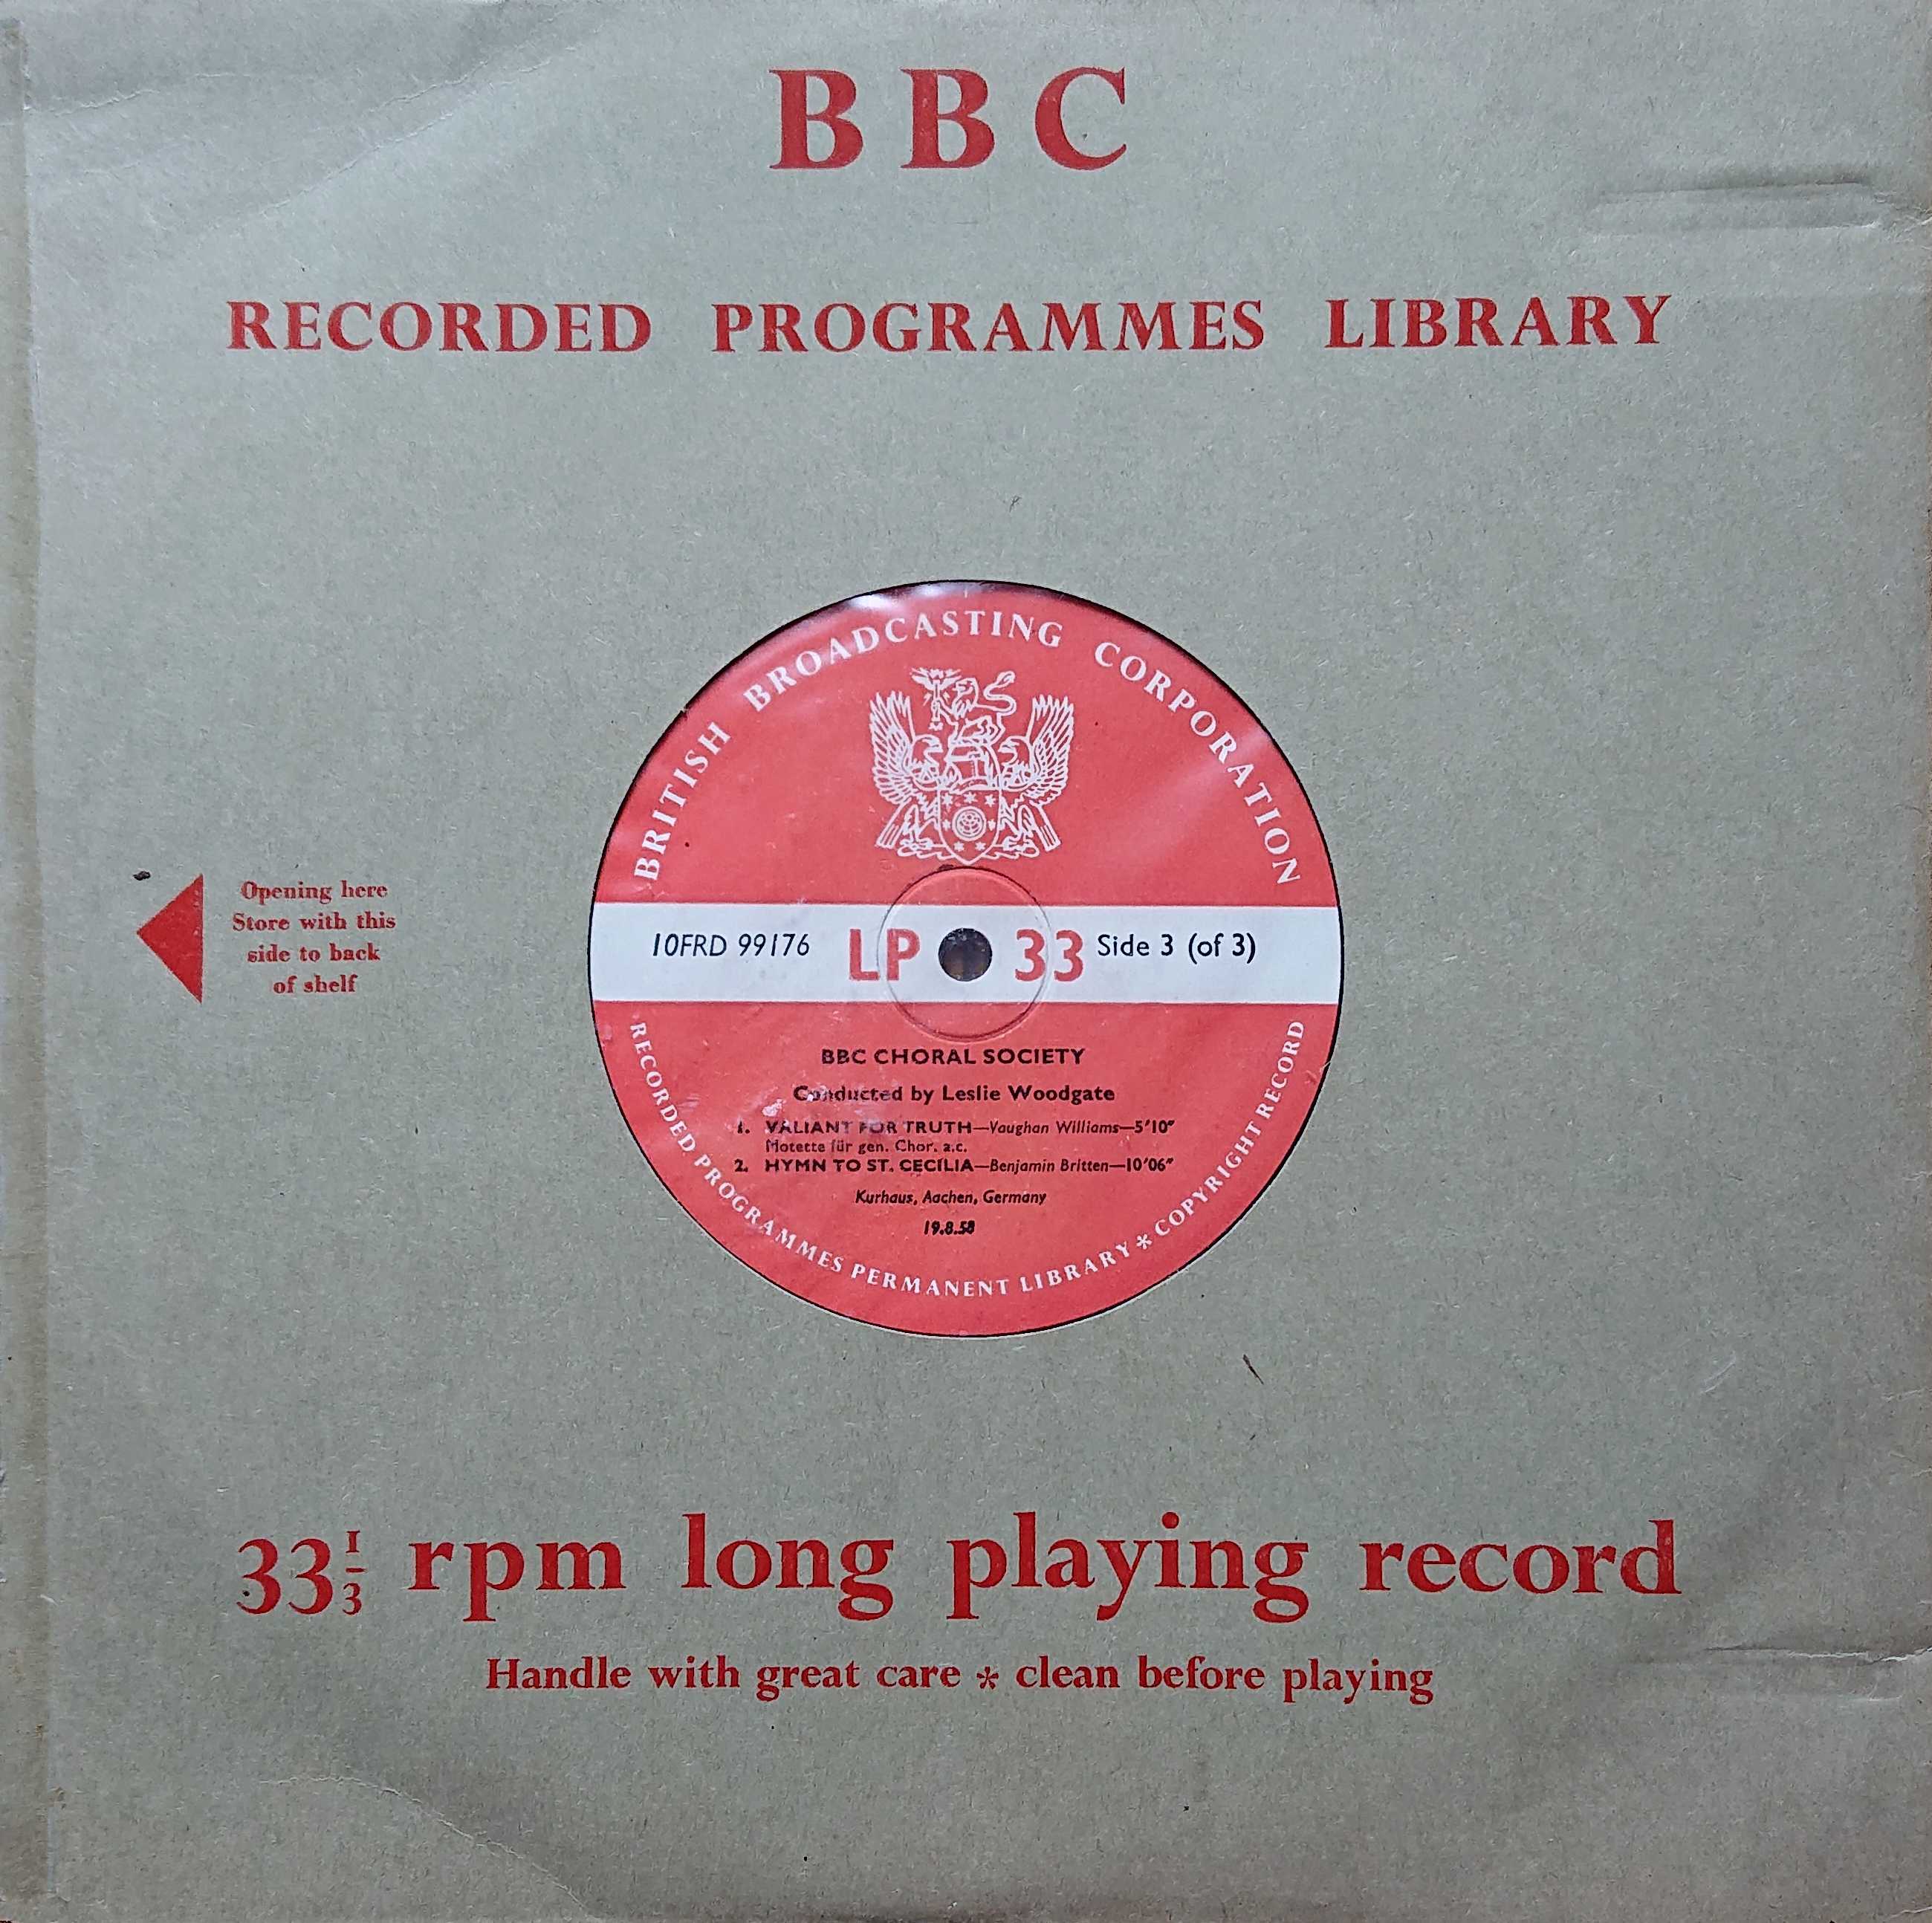 Picture of BBC Choral Society by artist Vaughan Williams / Benjamin Britten from the BBC 10inches - Records and Tapes library